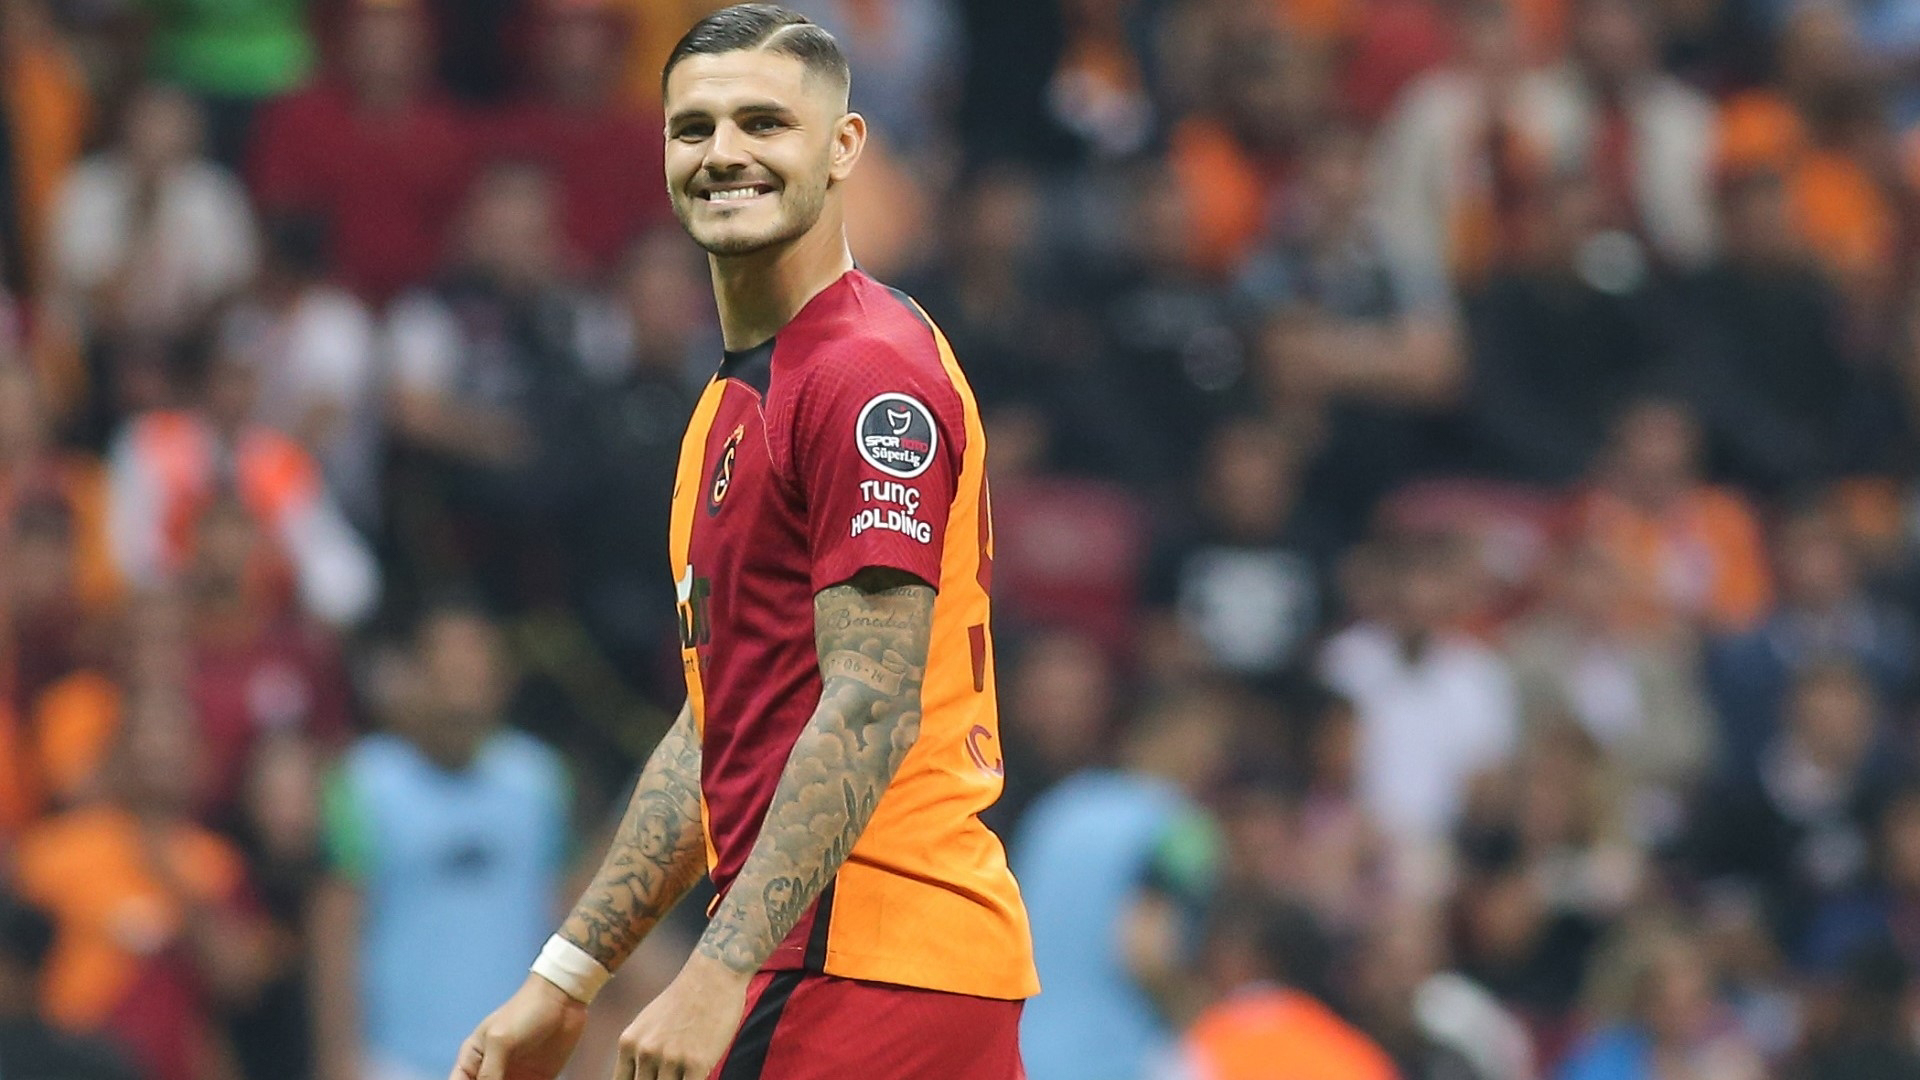 Victory for Galatasaray, debut for Icardi